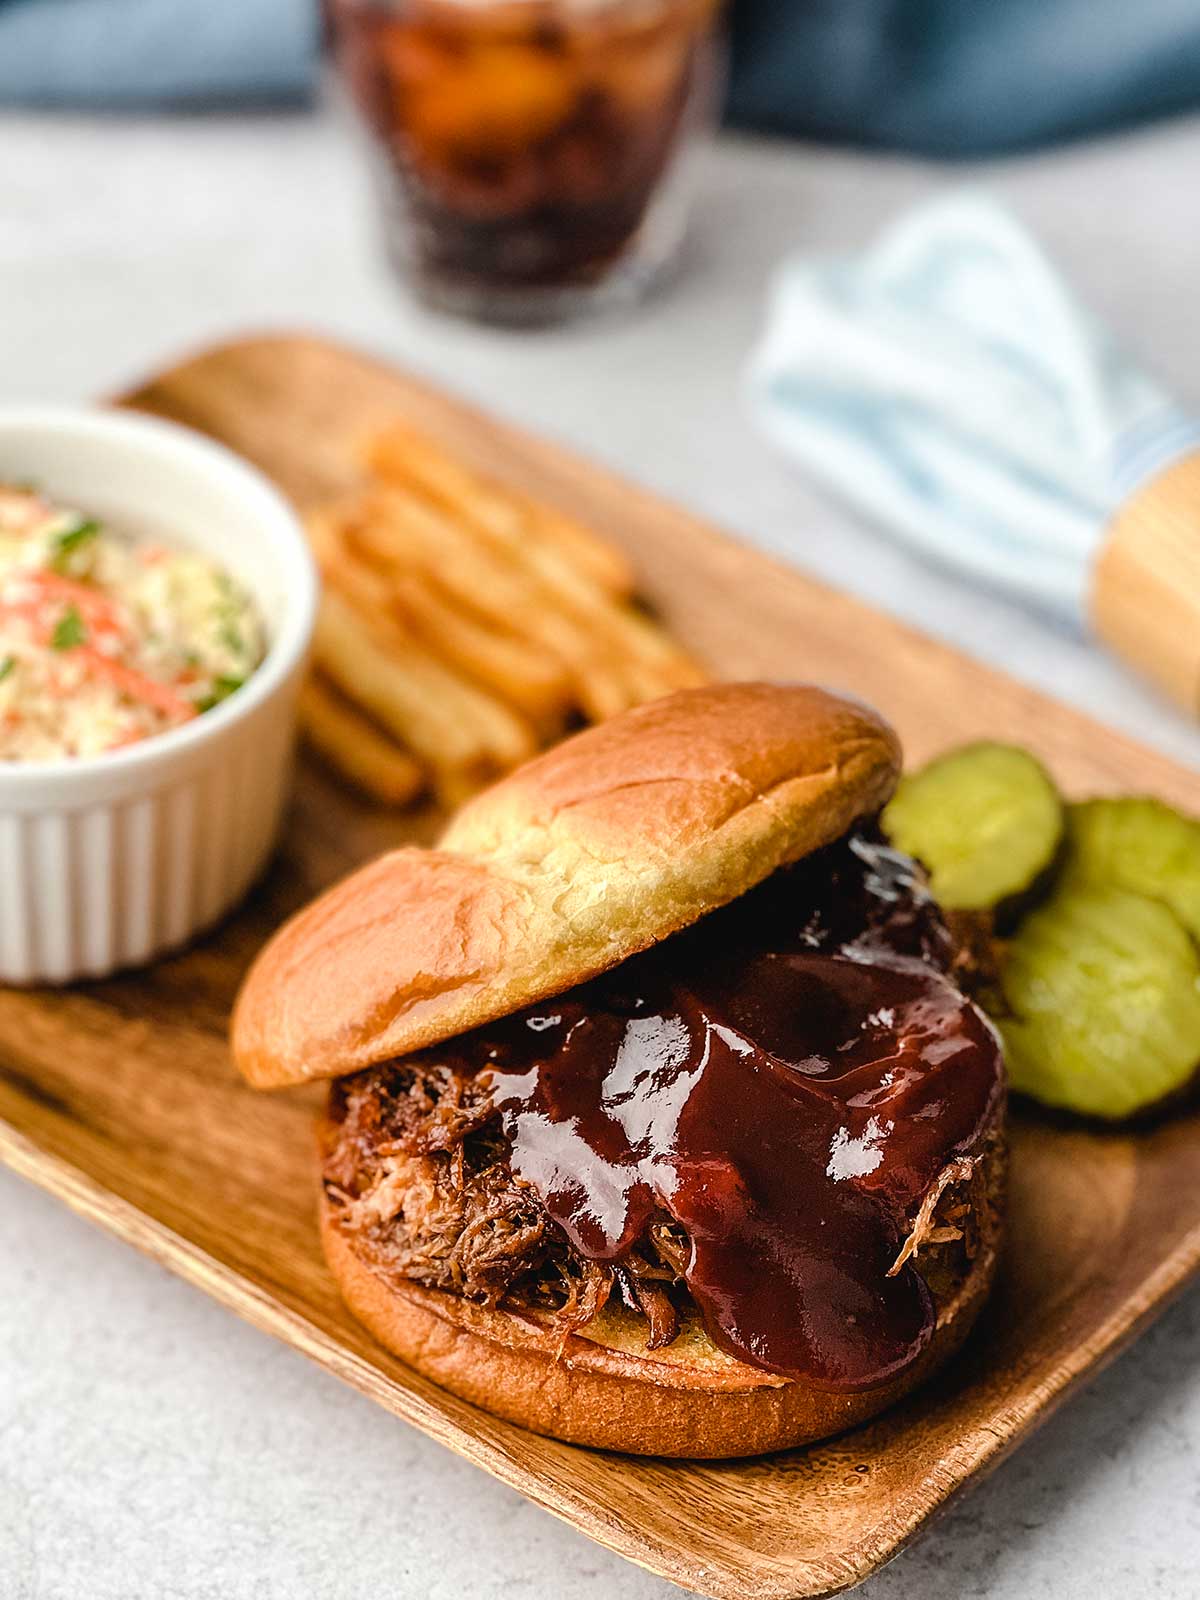 Pulled pork on a bun with barbecue sauce.